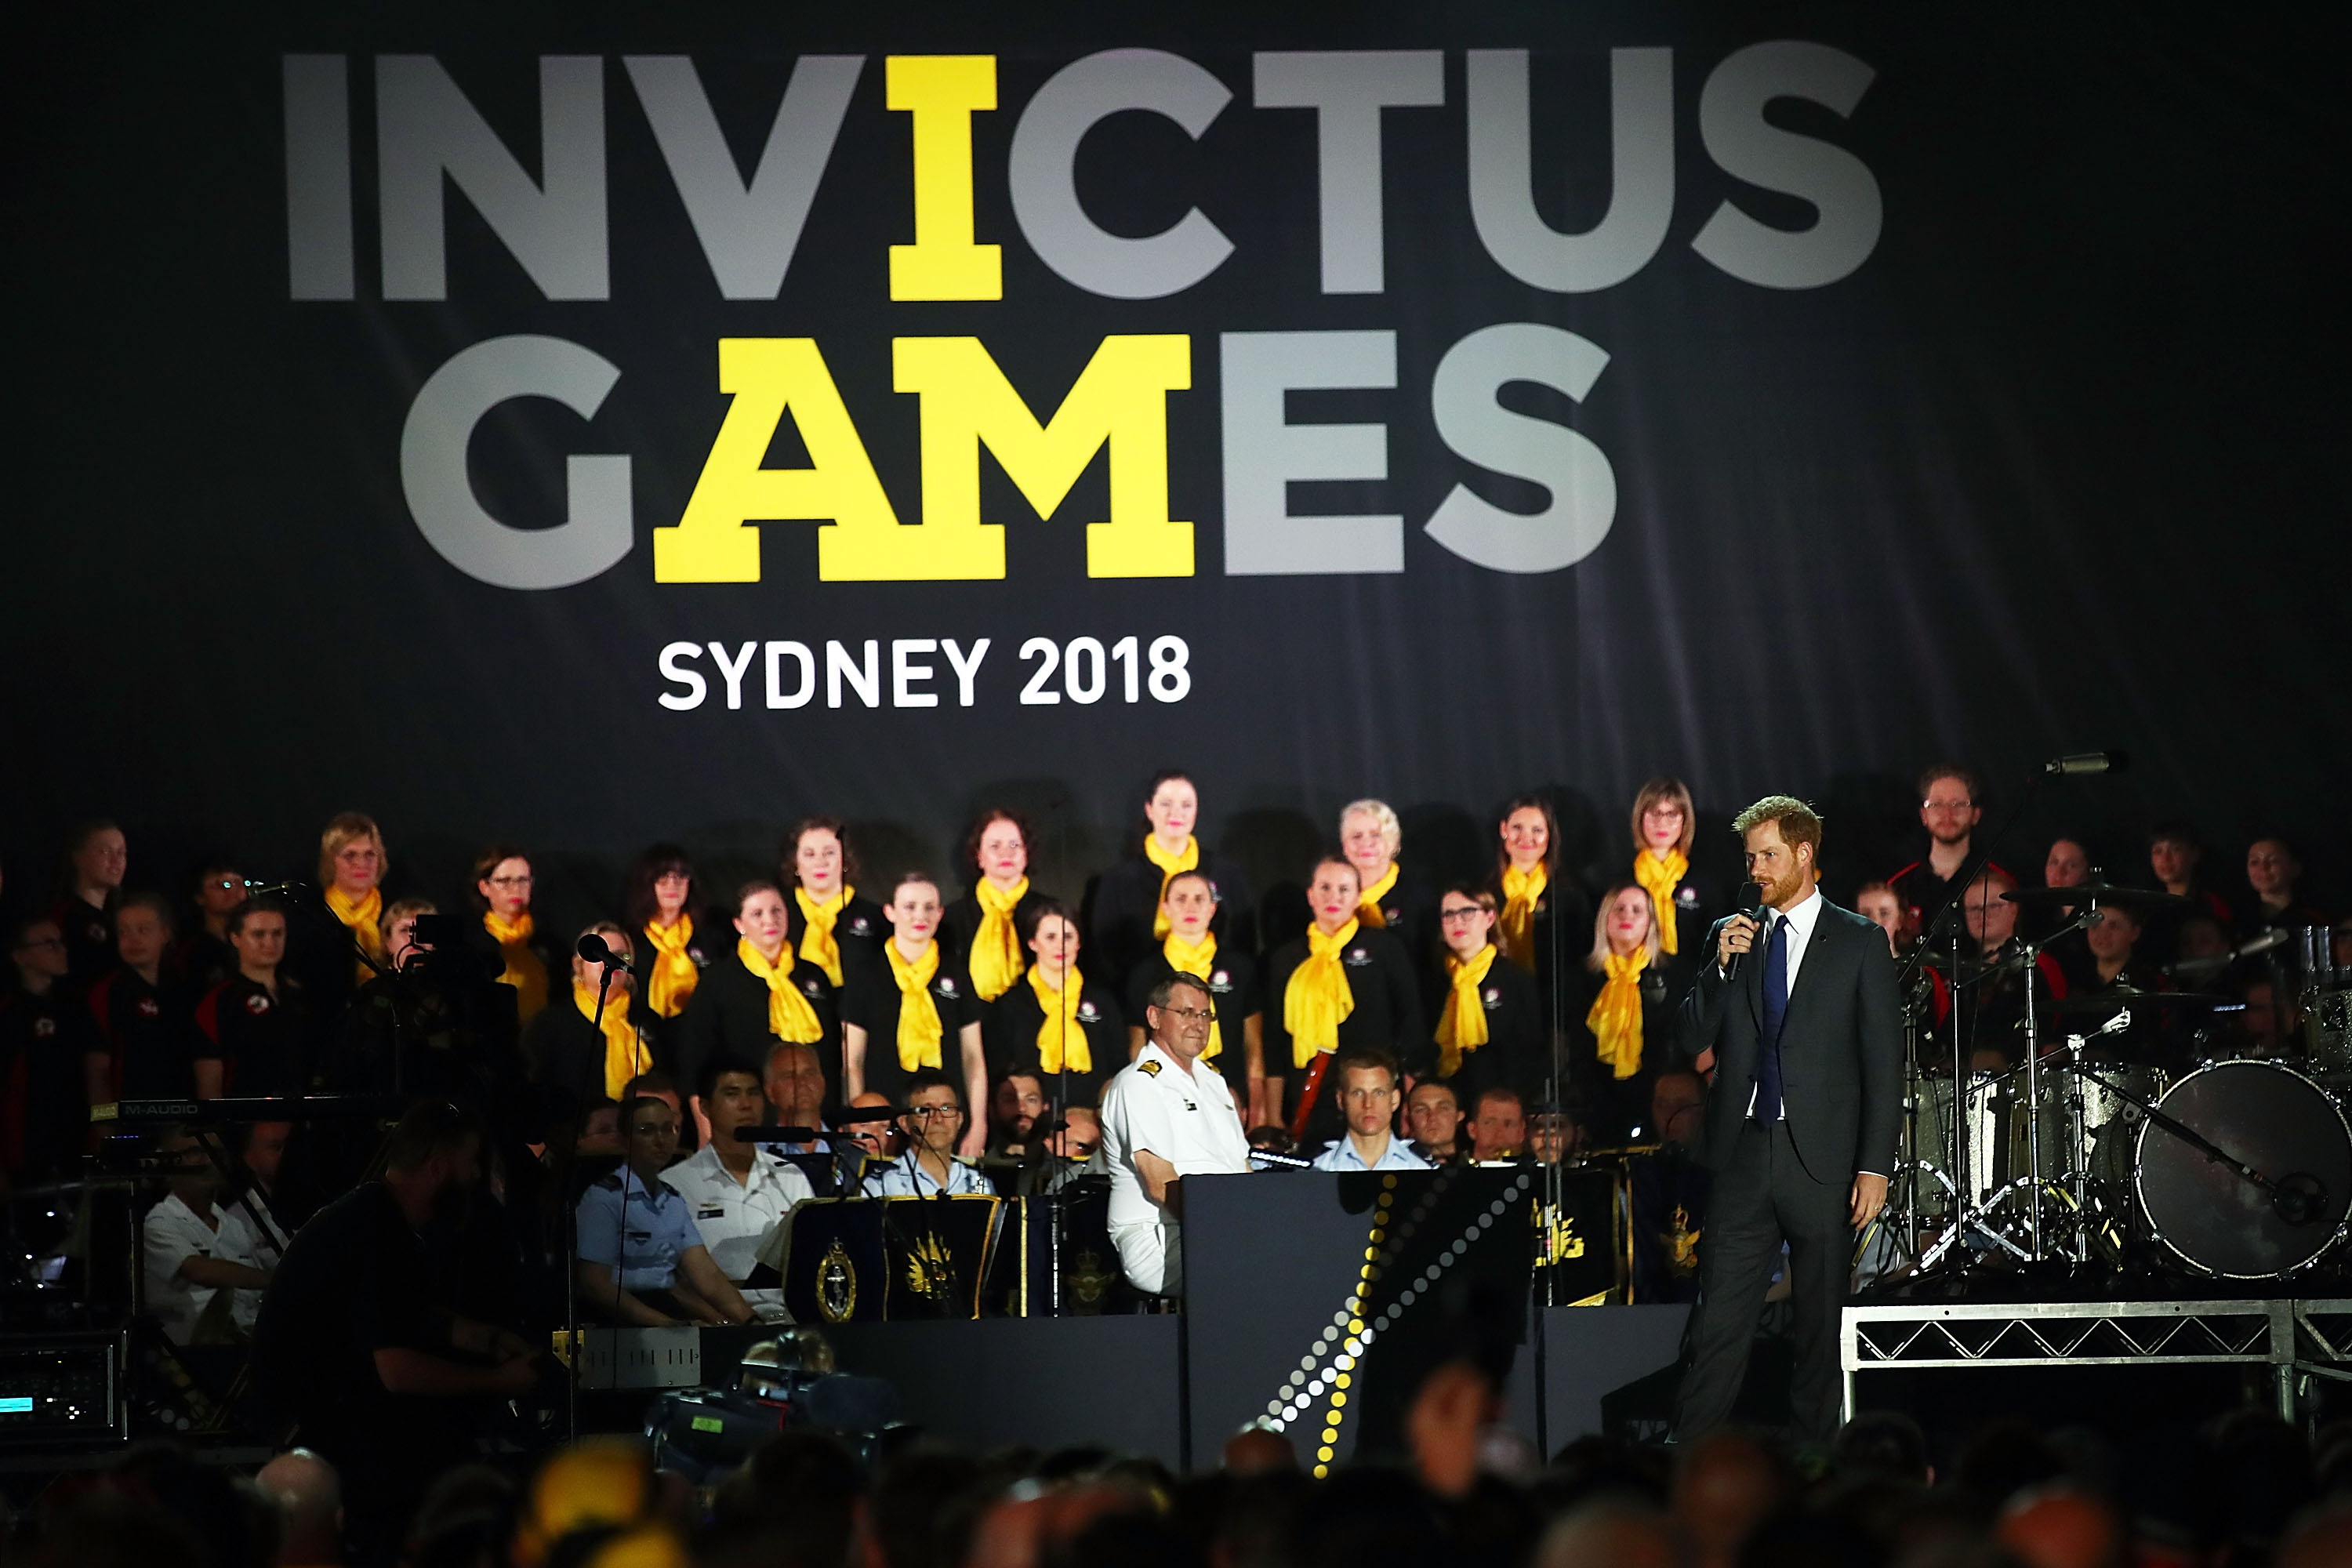 Prince Harry speaking during the nvictus Games Sydney 2018 Opening Ceremony at Sydney Opera House on October 20, 2018 in Sydney, Australia | Source: Getty Images